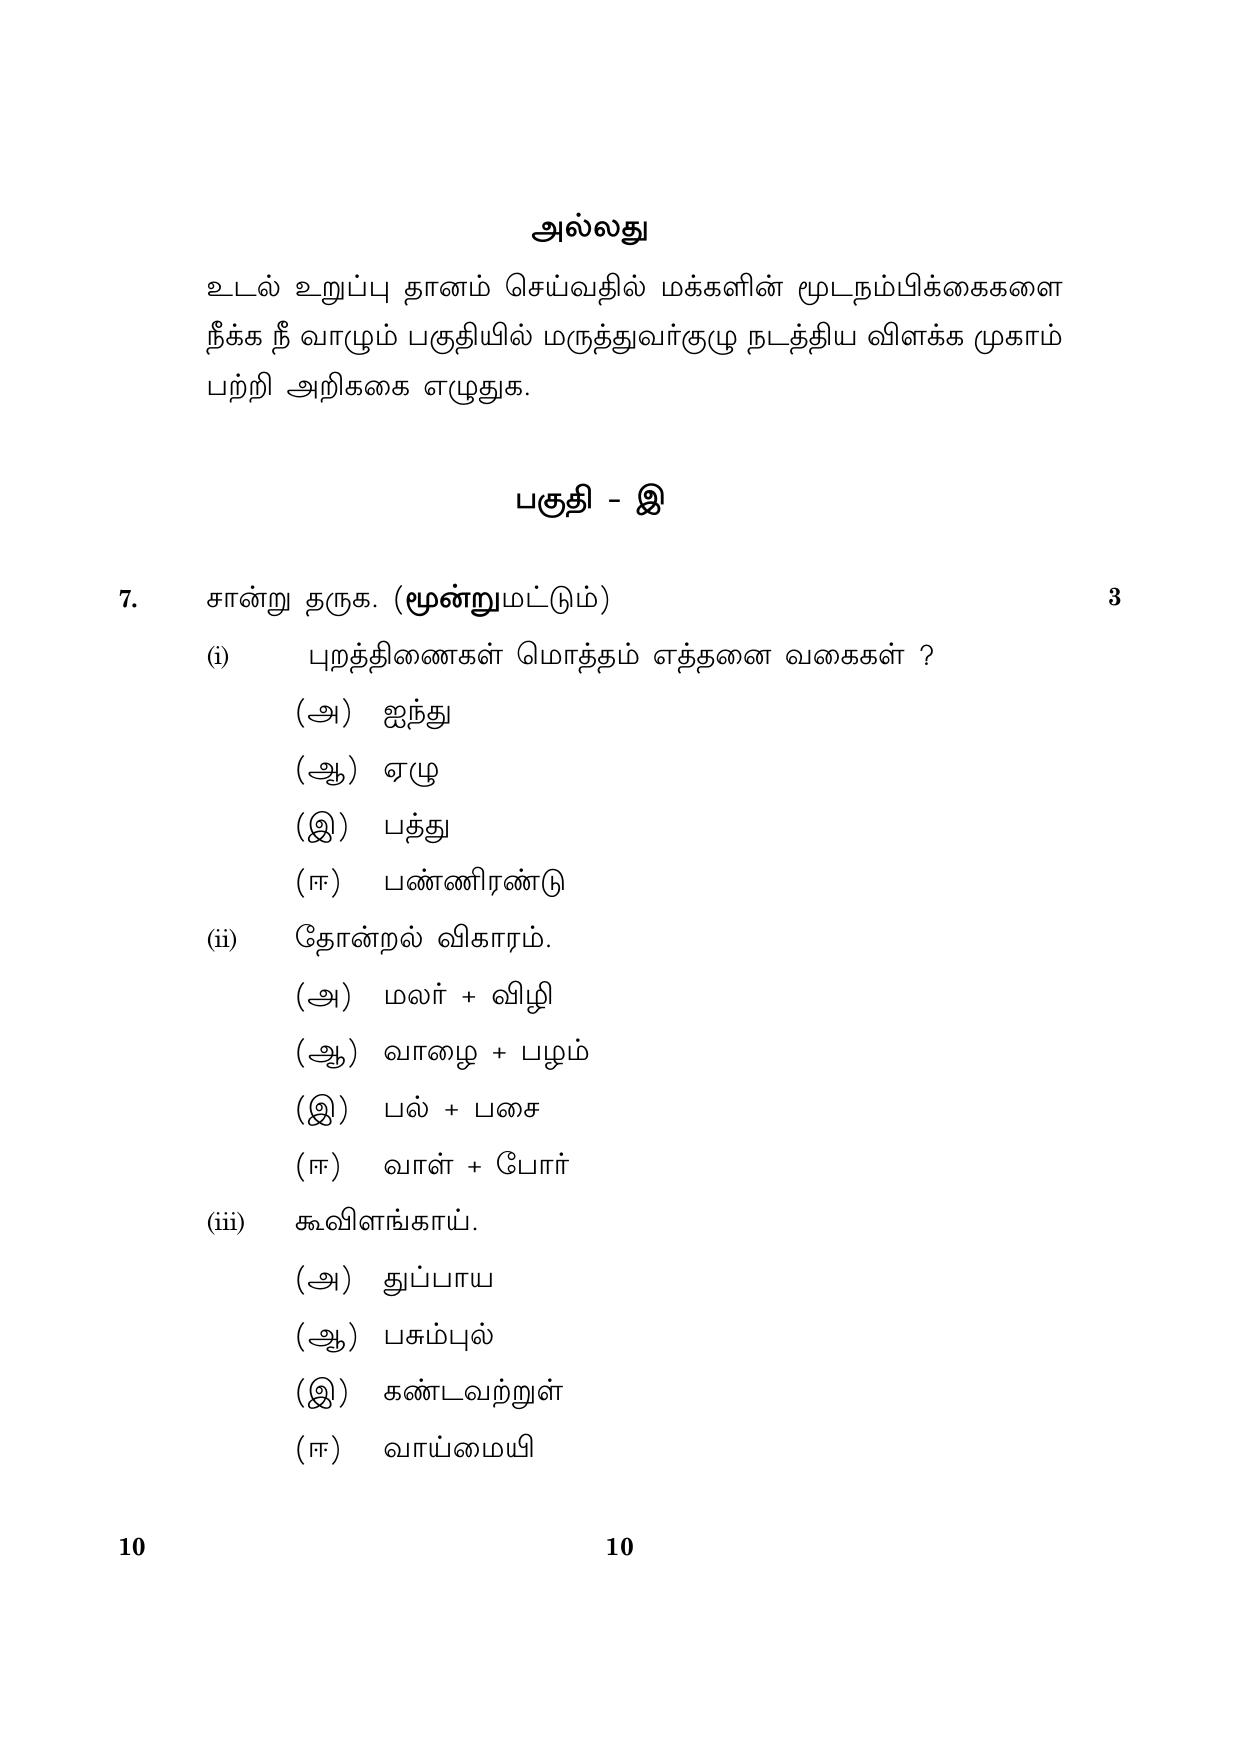 CBSE Class 10 010 Tamil 2016 Question Paper - Page 10